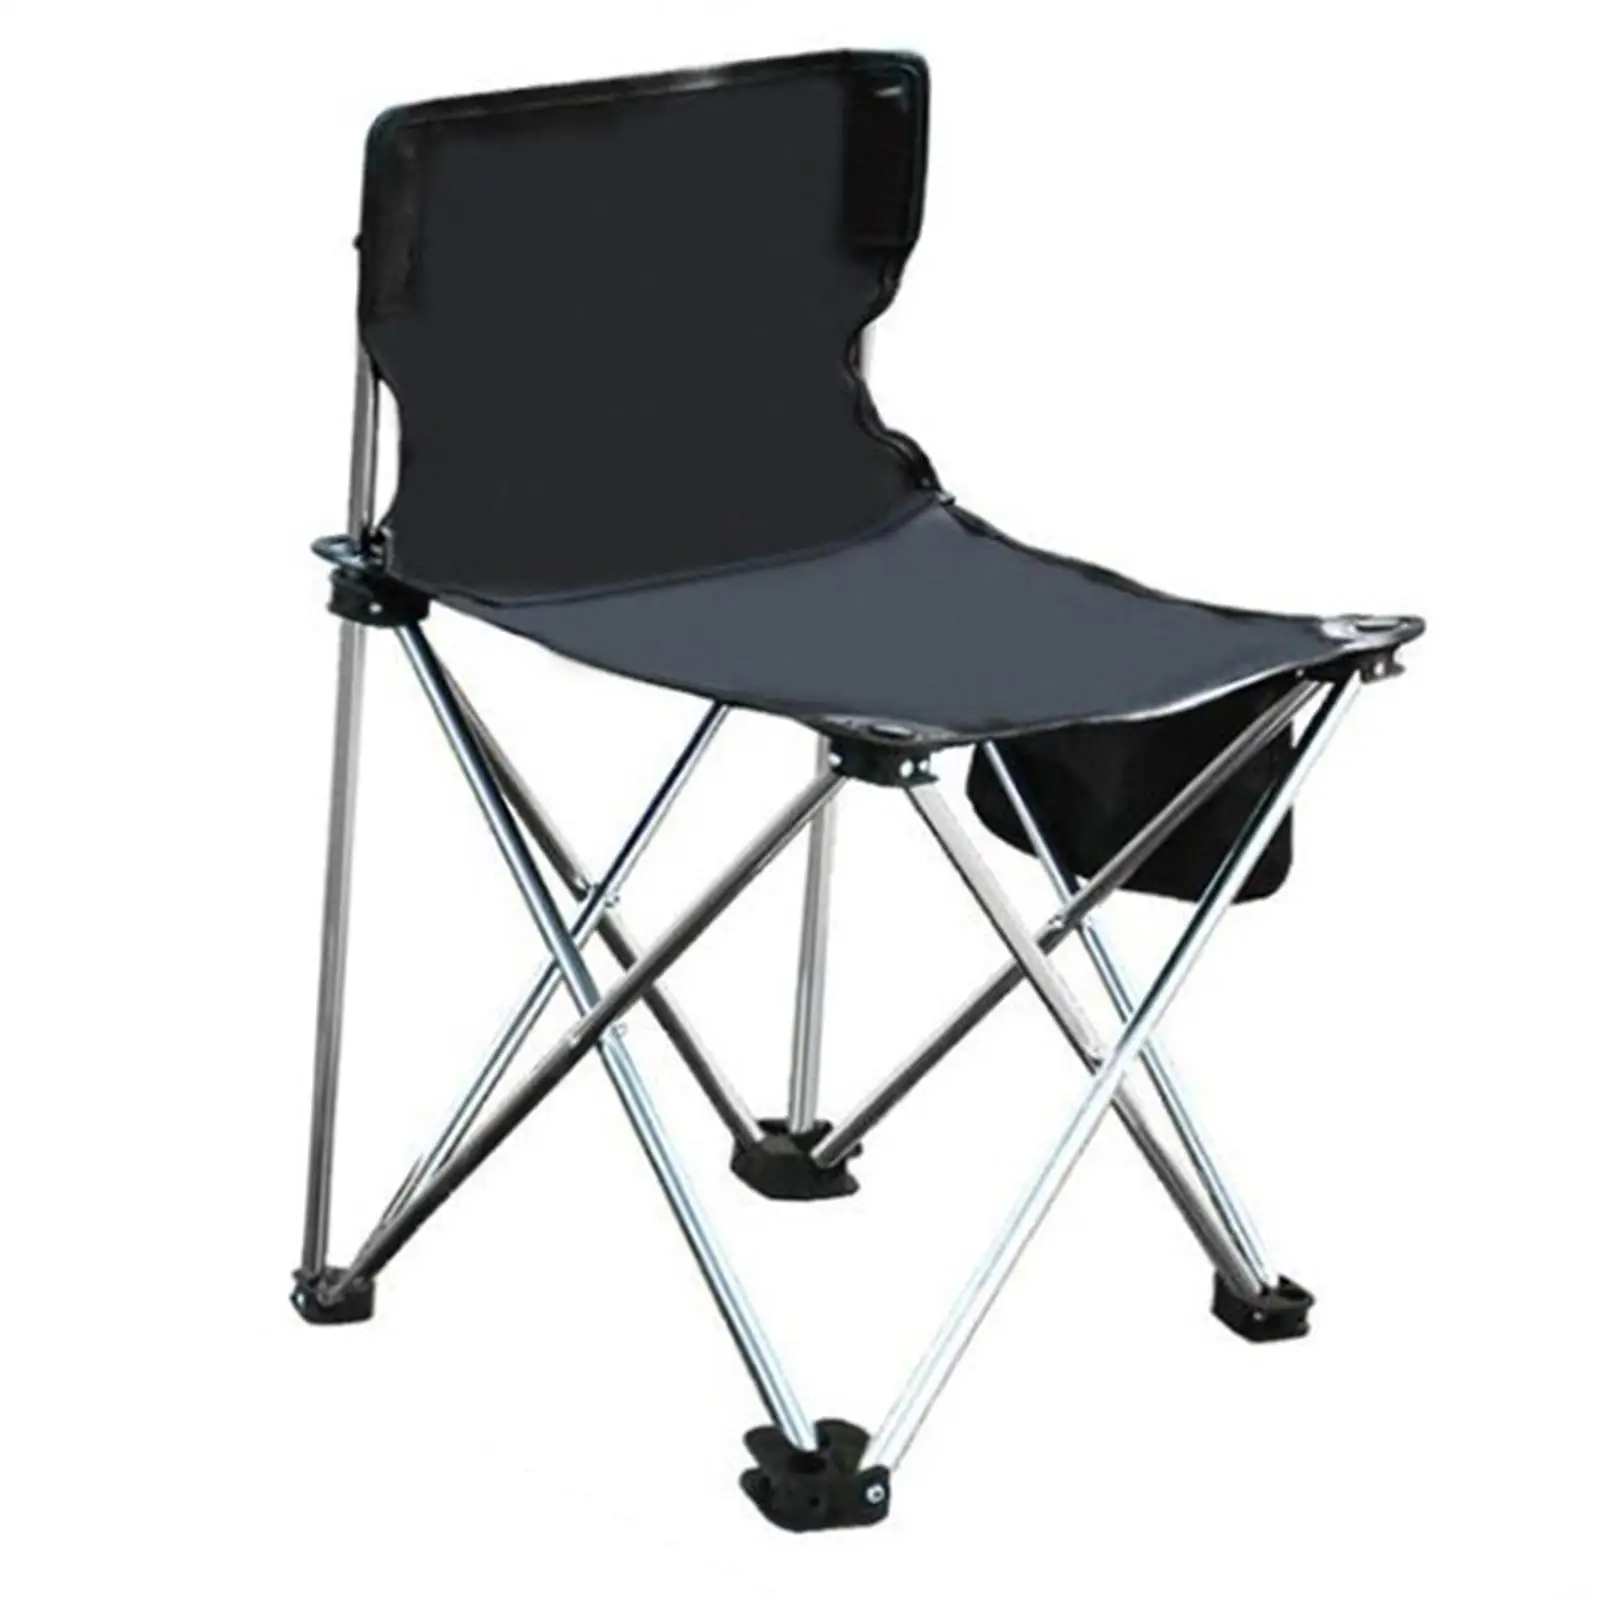 Portable Camping Chair Holds 330lbs for Heavy People Lightweight Fishing Chair Folding Chair for Park Picnic Hiking Sports Beach